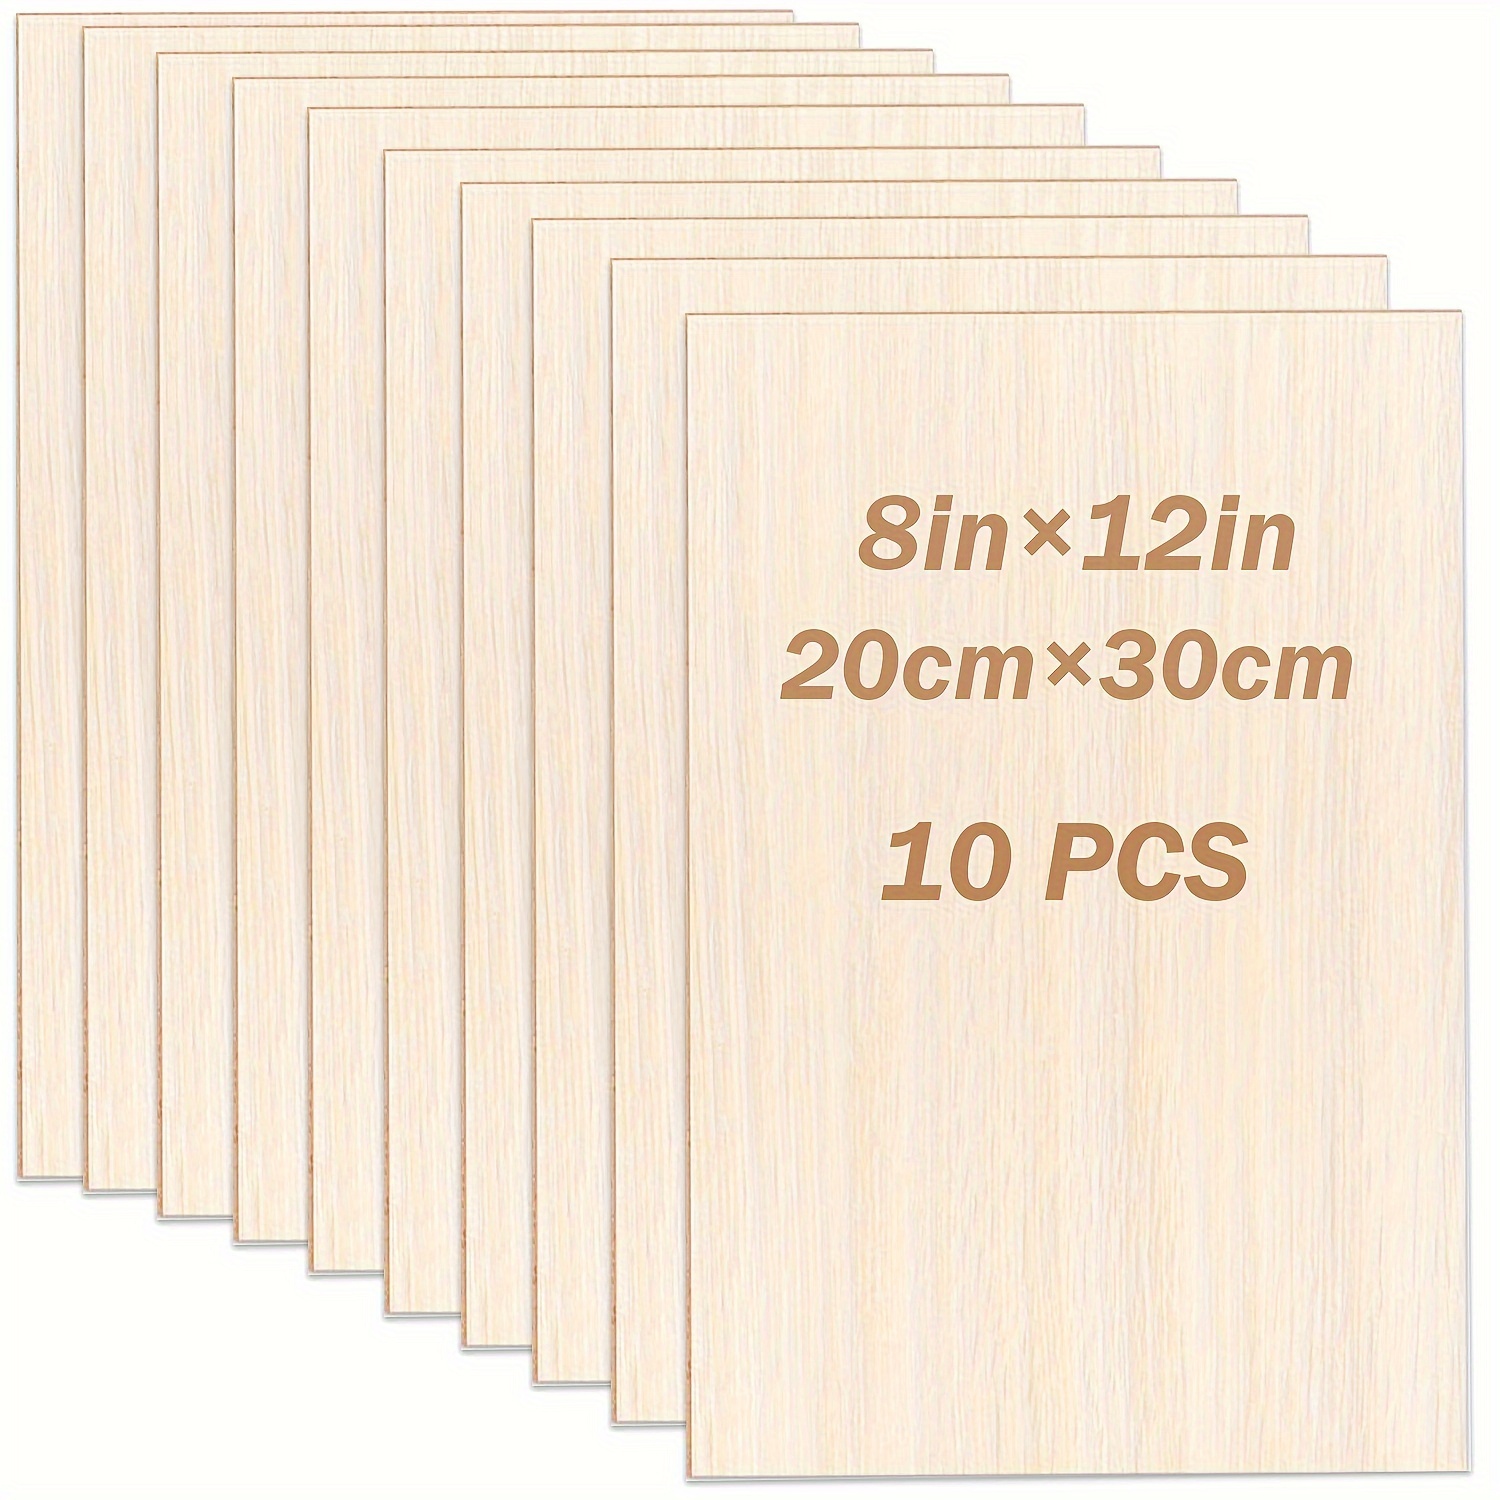 40 Pcak 2mm Balsa Wood Sheets 6x4 Balsawood Sheets for Crafts Basswood Thin  Craft Wood Board for Architectural Models Drawing Painting Wood Engraving